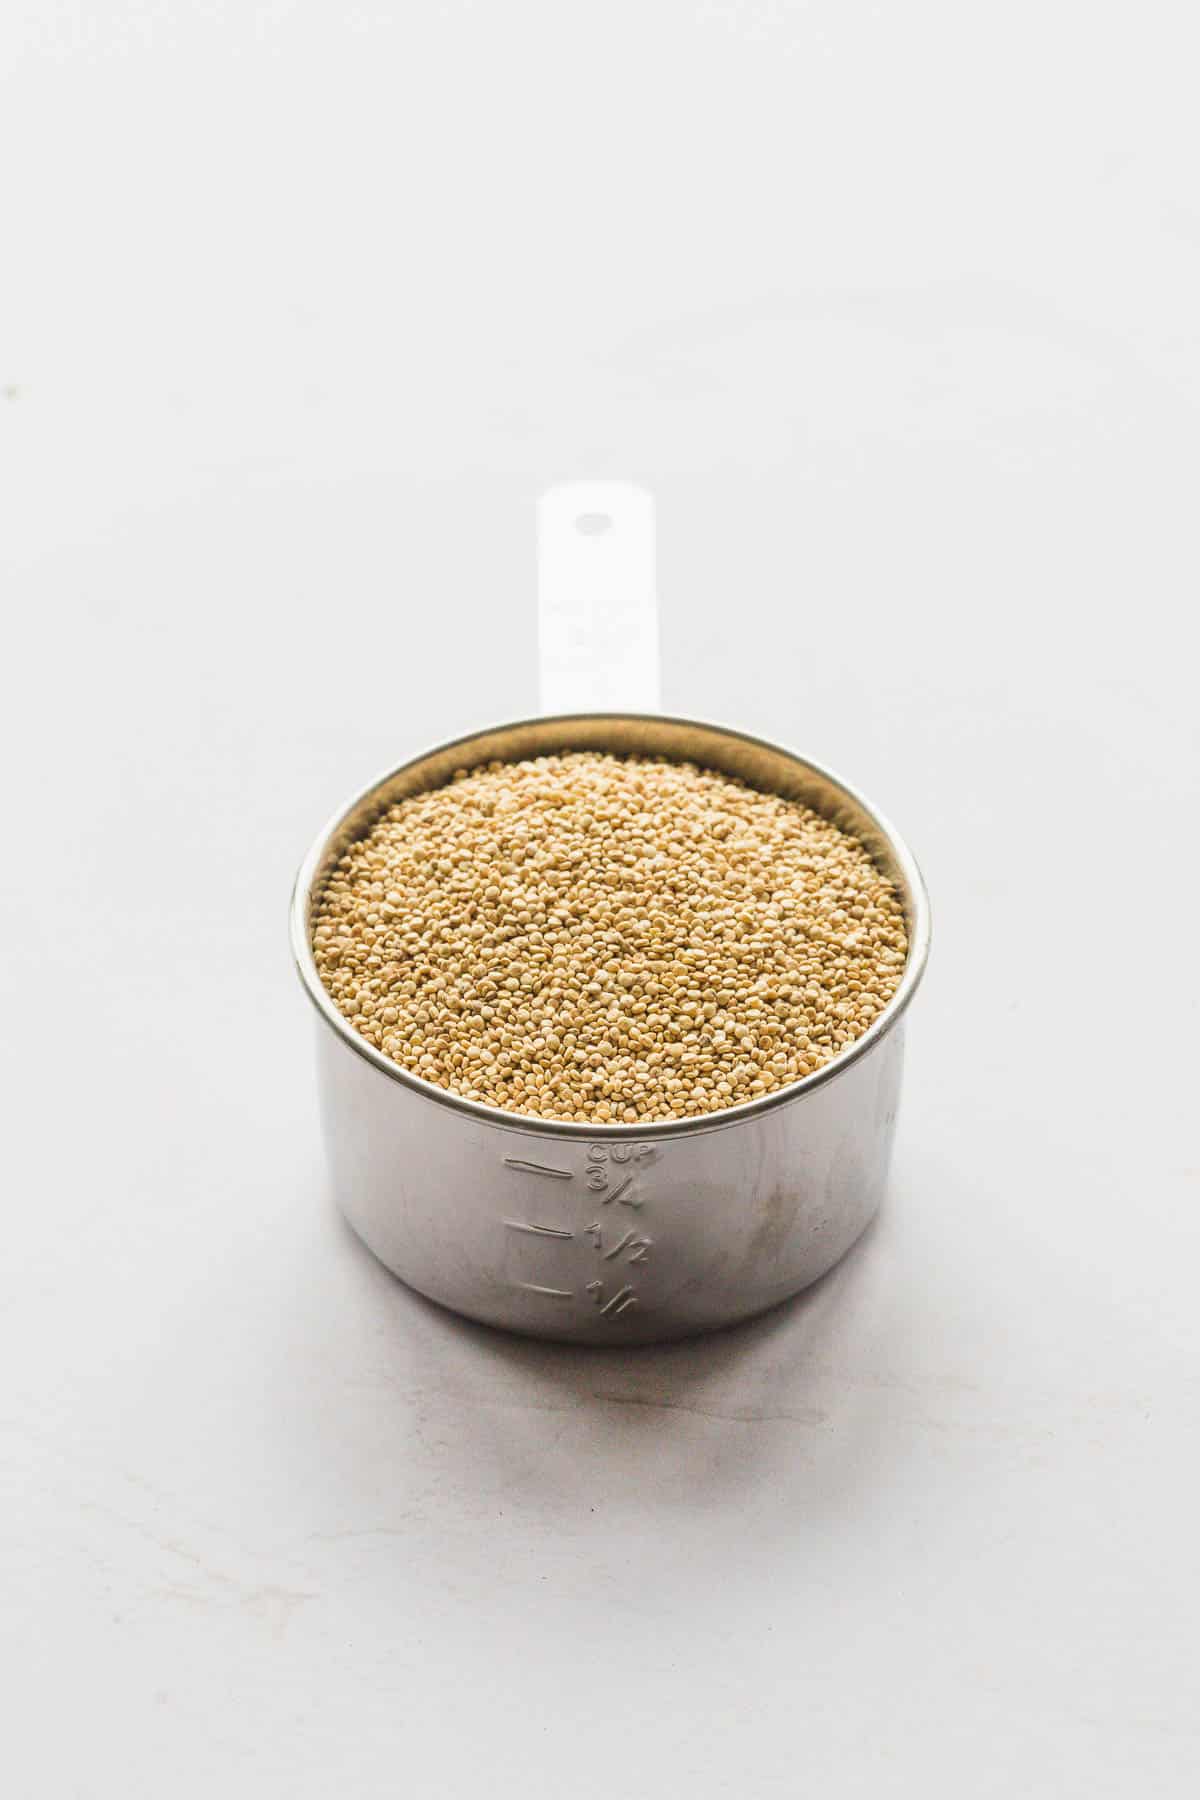 A metalic cup with quinoa seeds